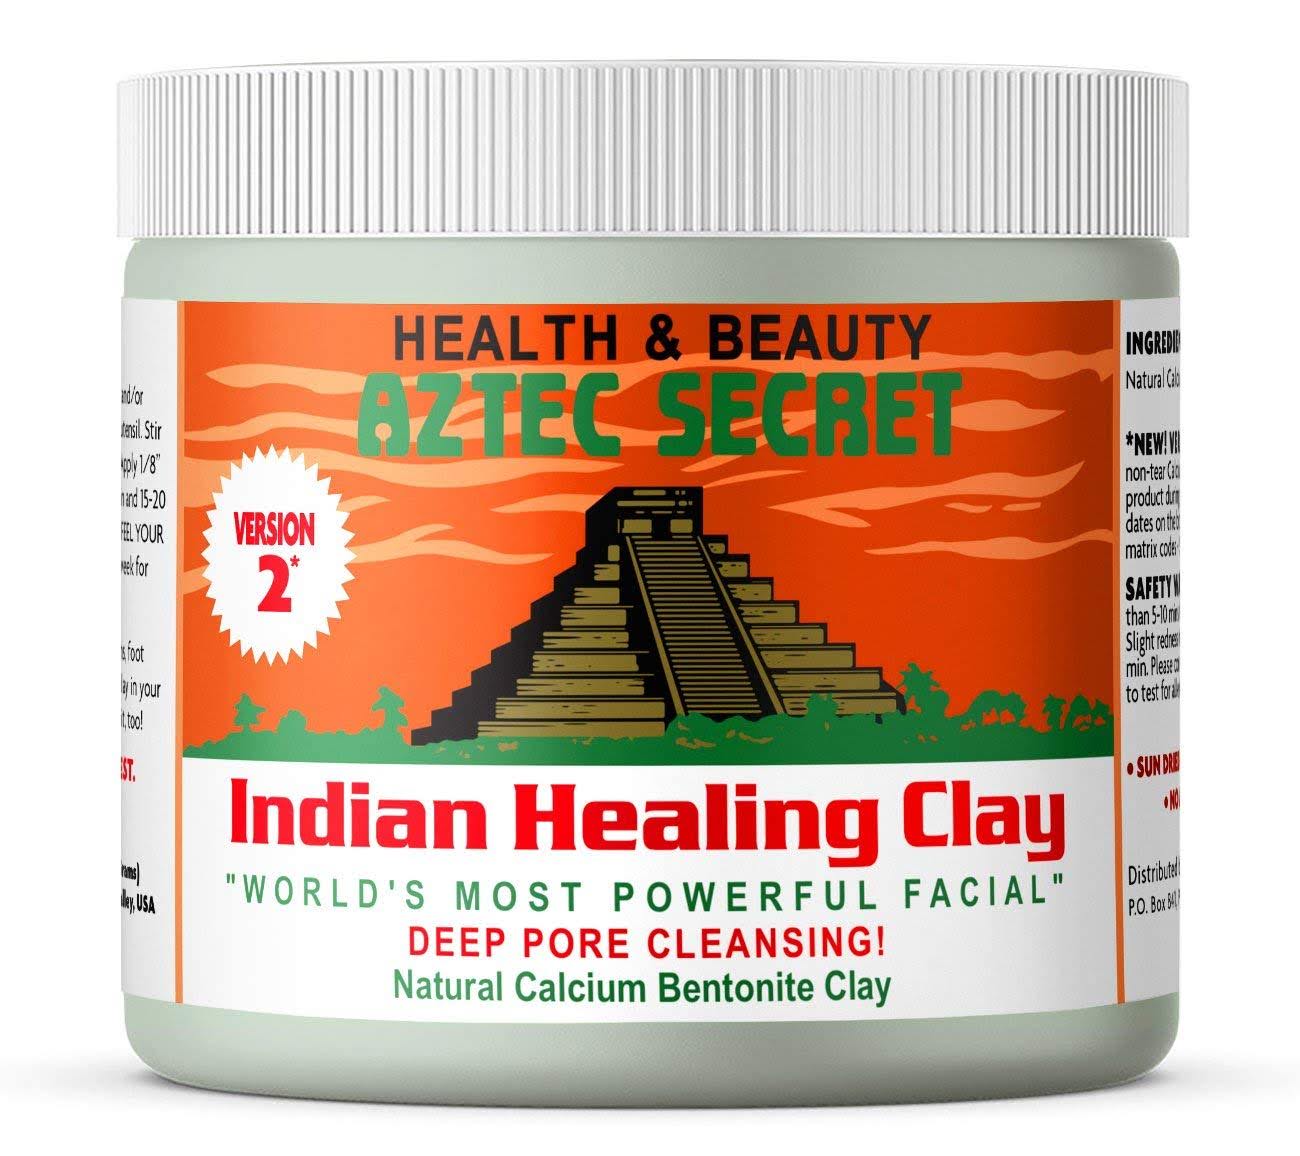 A 16-oz tub of Indian healing clay for deep pore cleansing